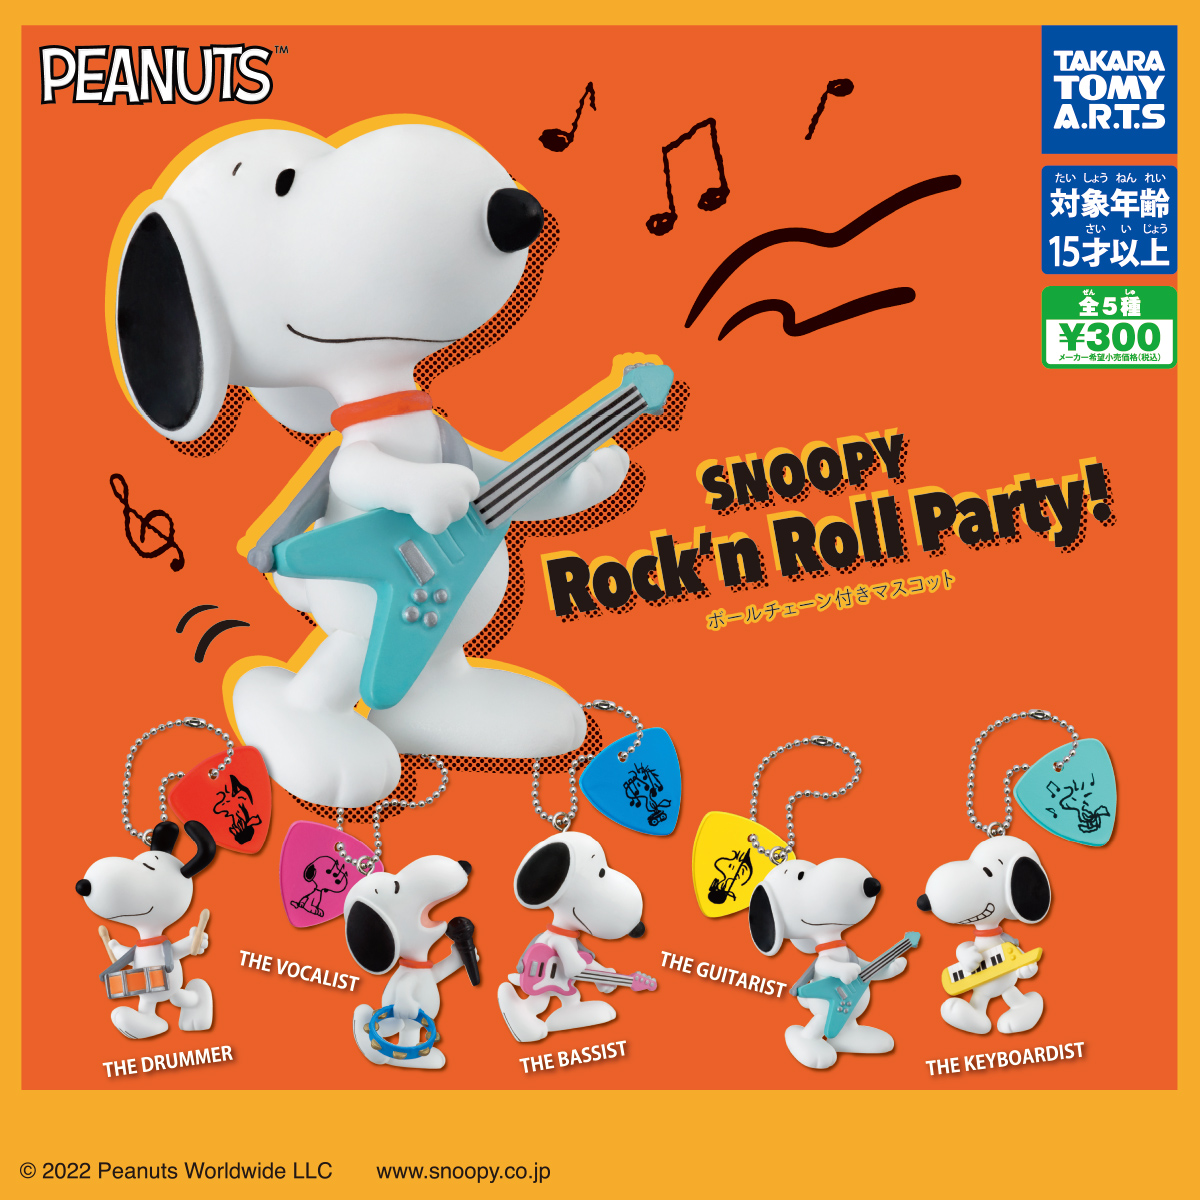 Snoopy Rock N Roll Party 商品情報 タカラトミーアーツ